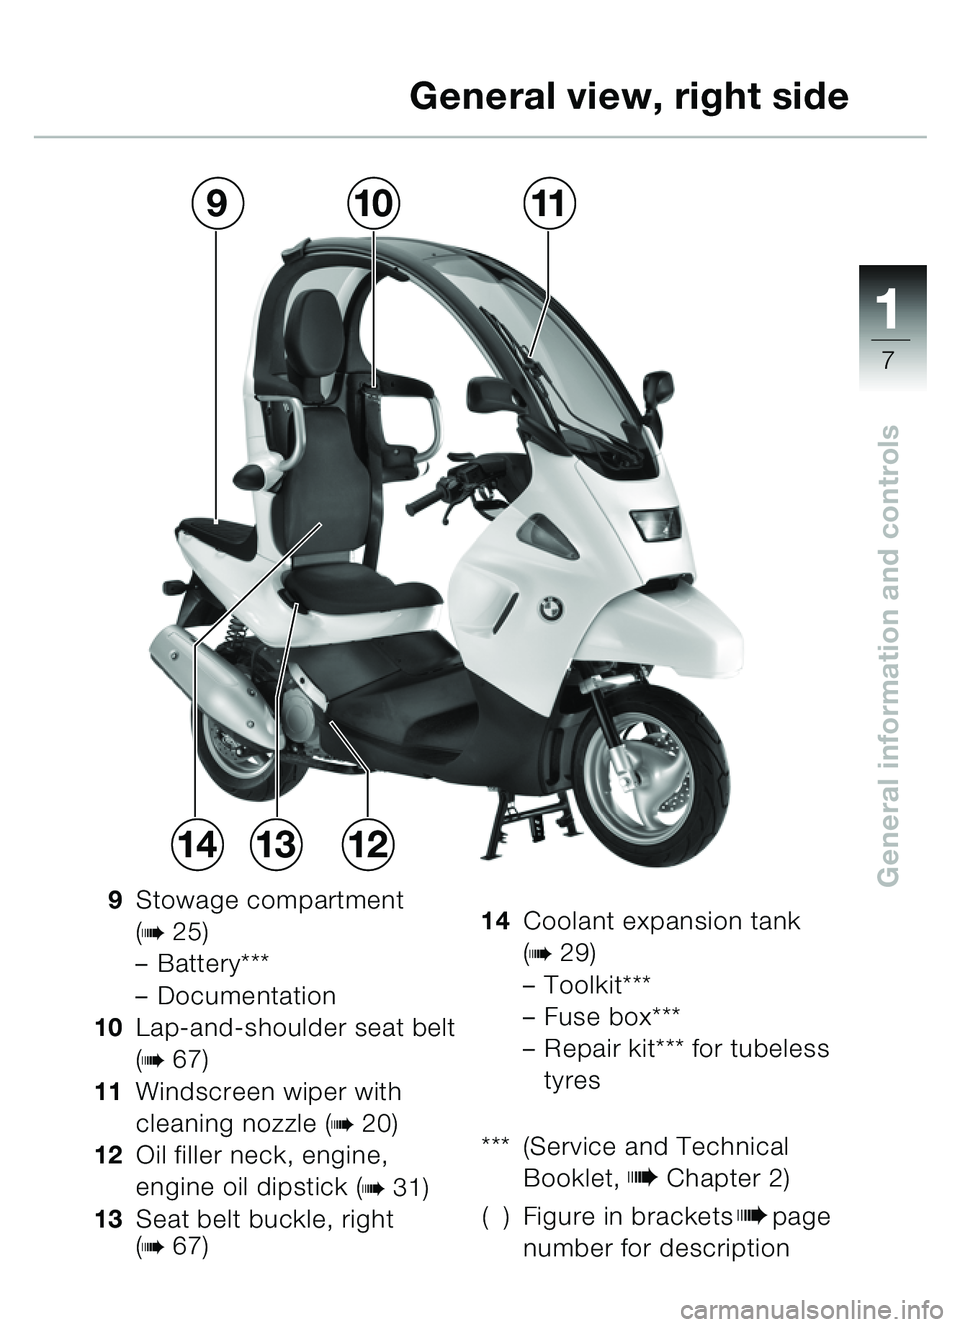 BMW MOTORRAD C1 2000  Riders Manual (in English) 111
7
General information and controls
General view, right side
9Stowage compartment 
(
b25)
– Battery***
– Documentation
10 Lap-and-shoulder seat belt 
(
b67)
11 Windscreen wiper with 
cleaning n